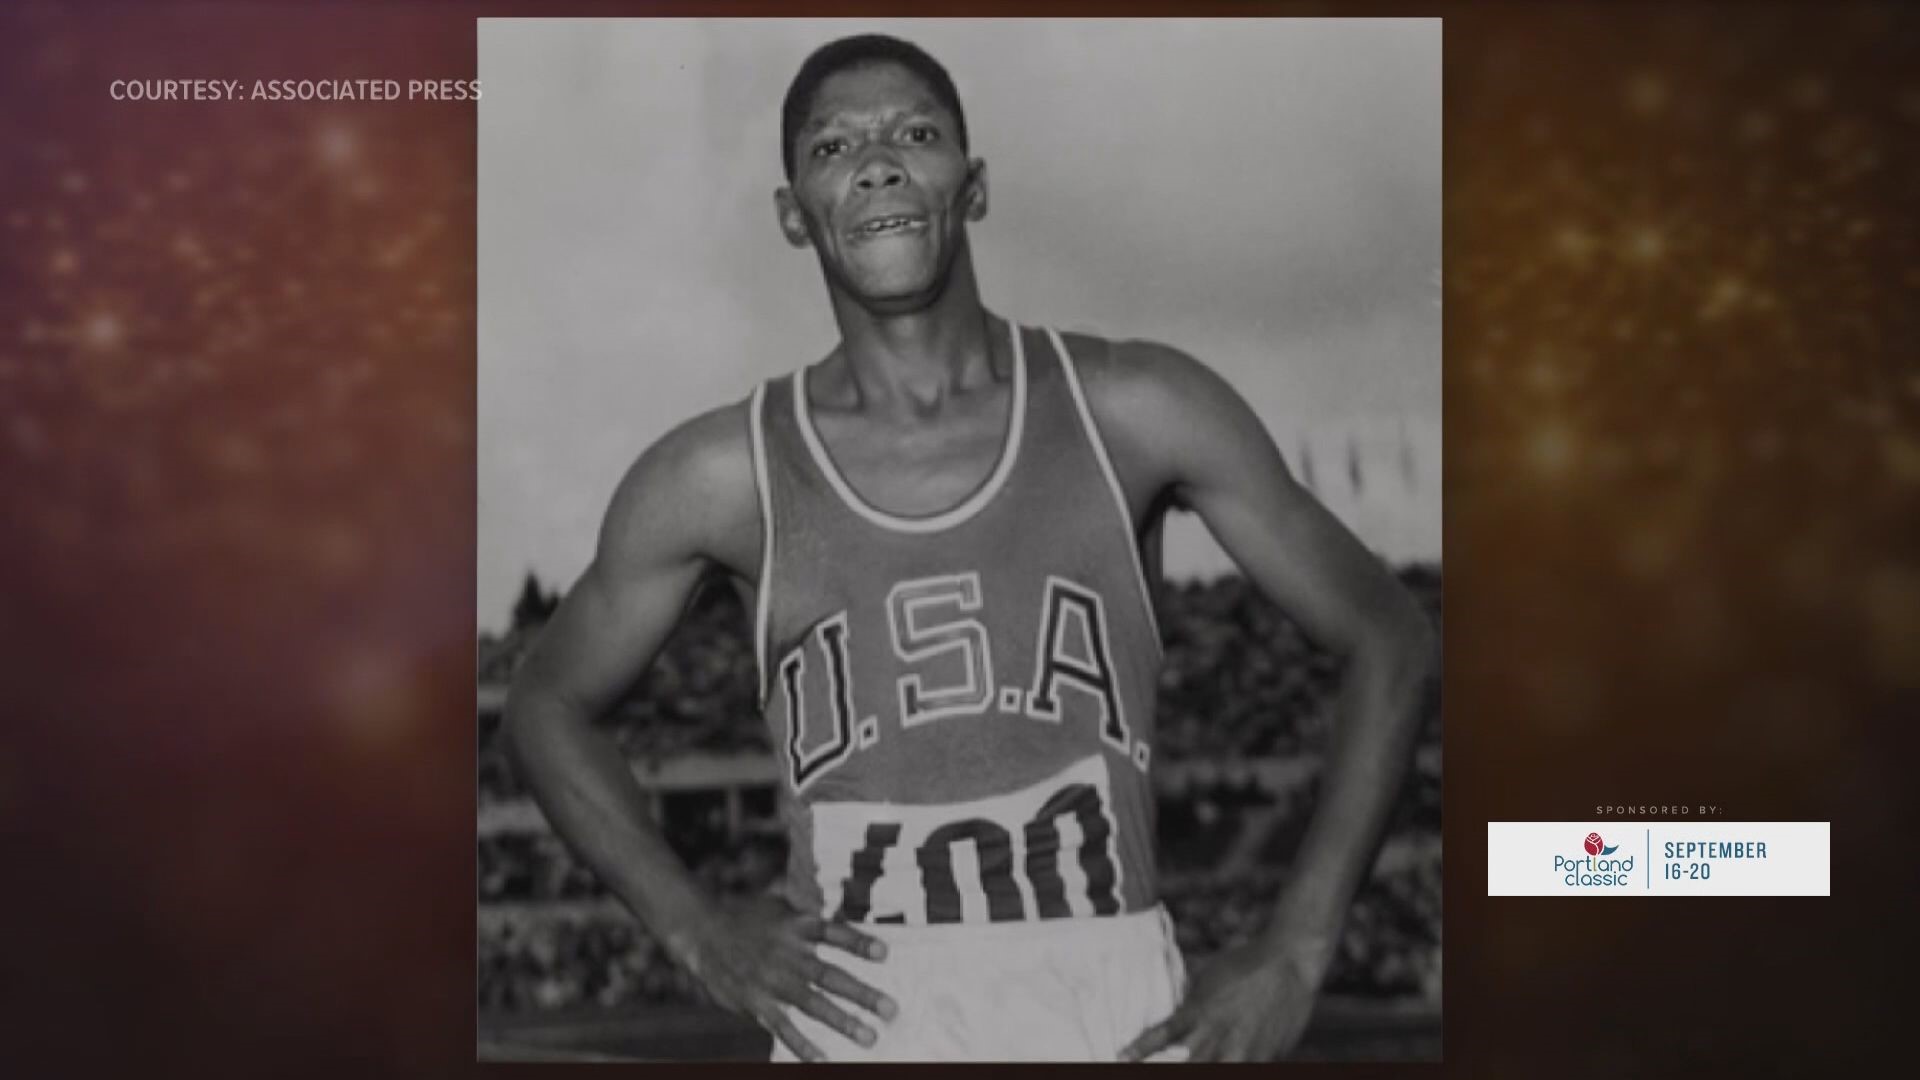 Otis Davis won two gold medals in the 1960 Olympics in Rome. His journey to get there is about sacrifice and perseverance.